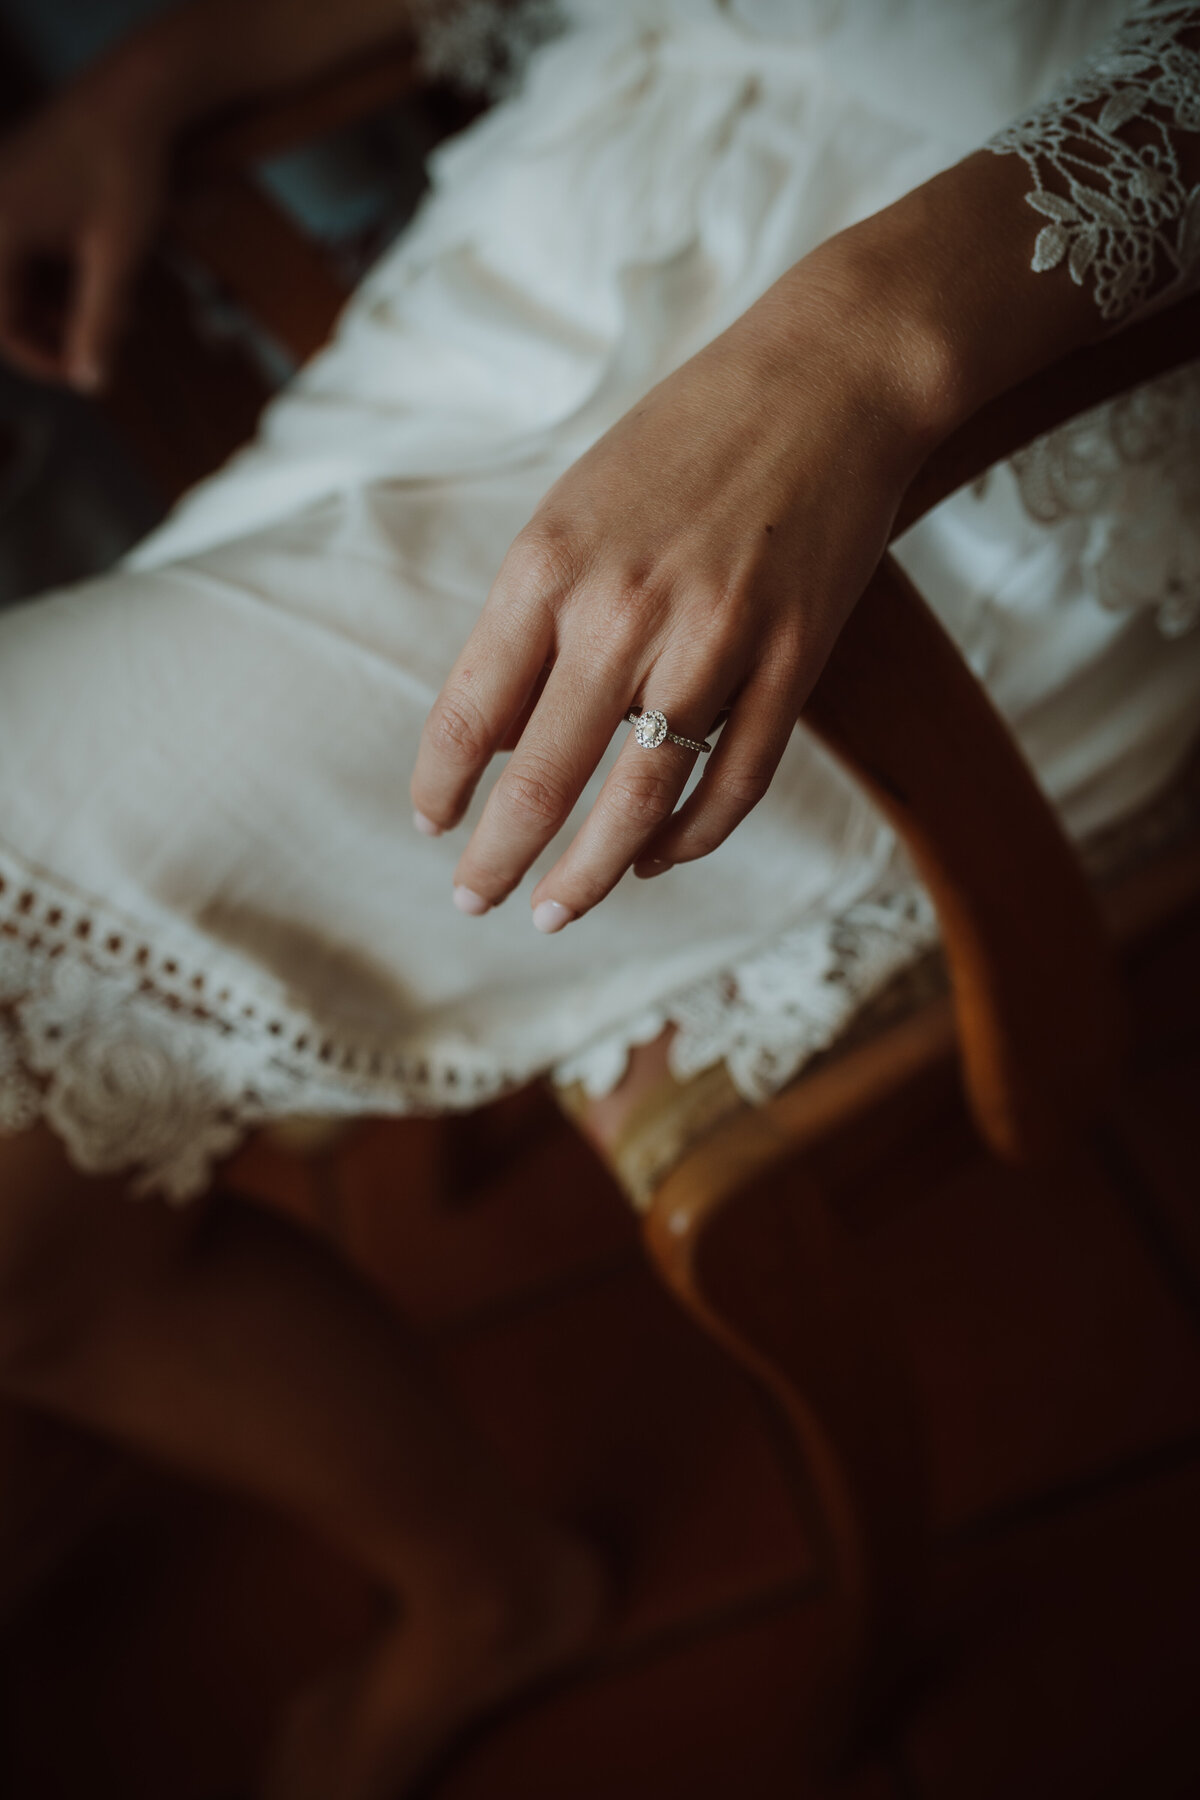 A bride's hand showing her engagement ring